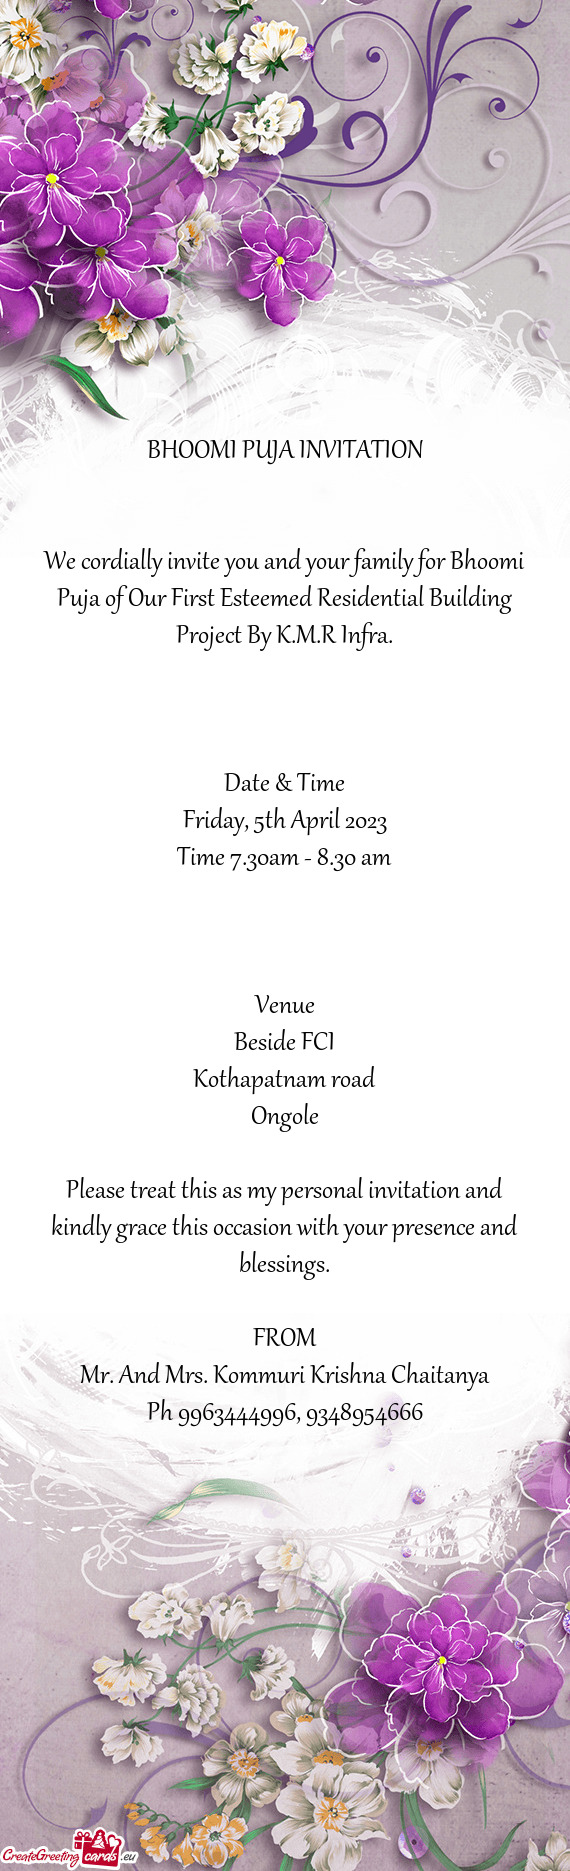 We cordially invite you and your family for Bhoomi Puja of Our First Esteemed Residential Building P